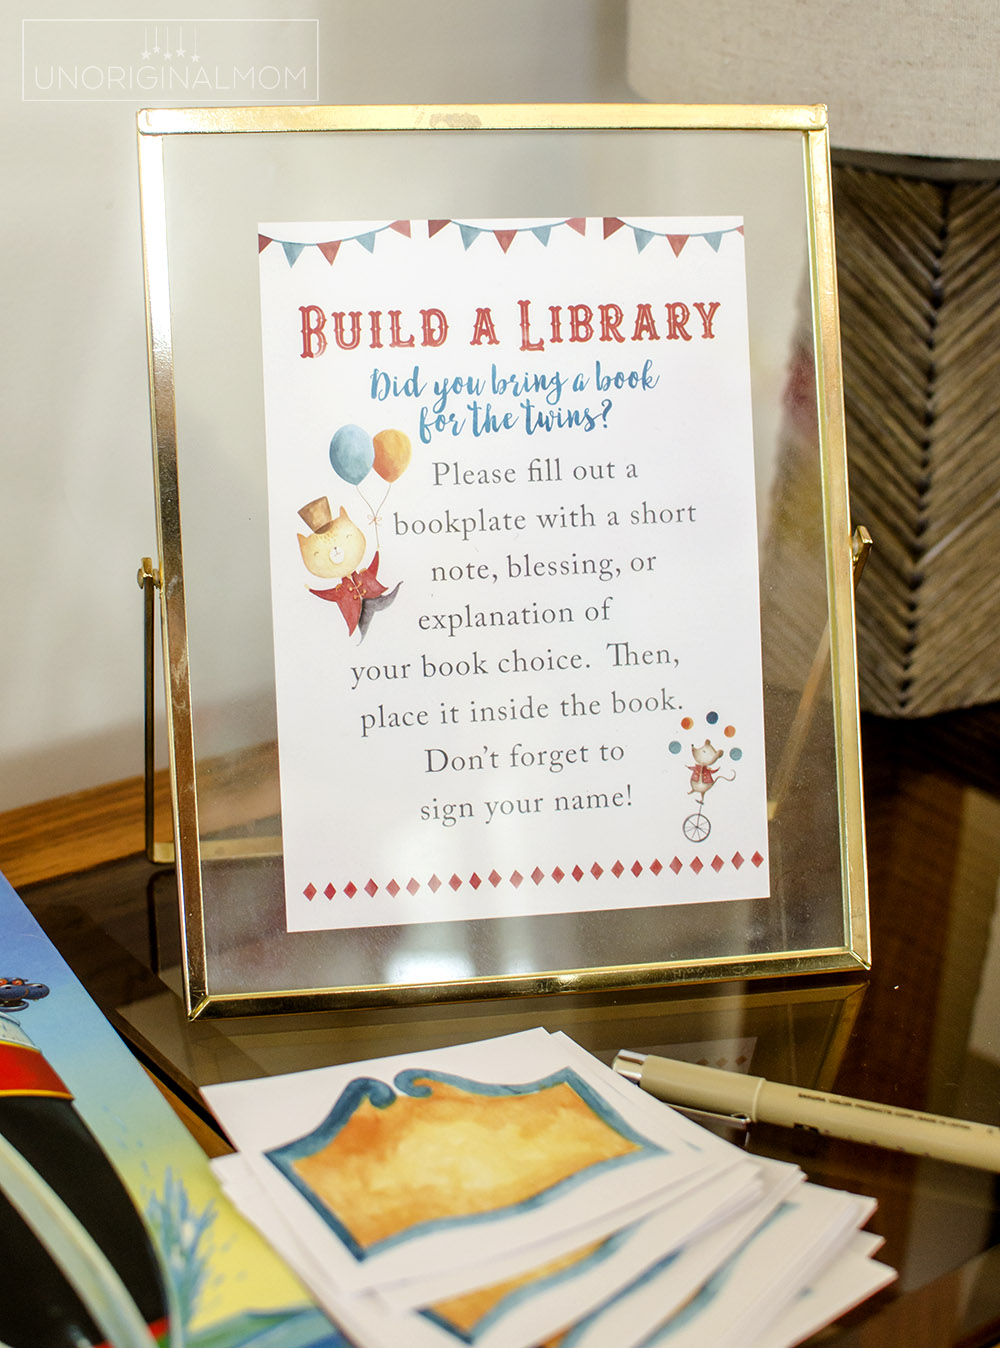 "Build a Library" baby shower idea with custom print and cut book plate labels